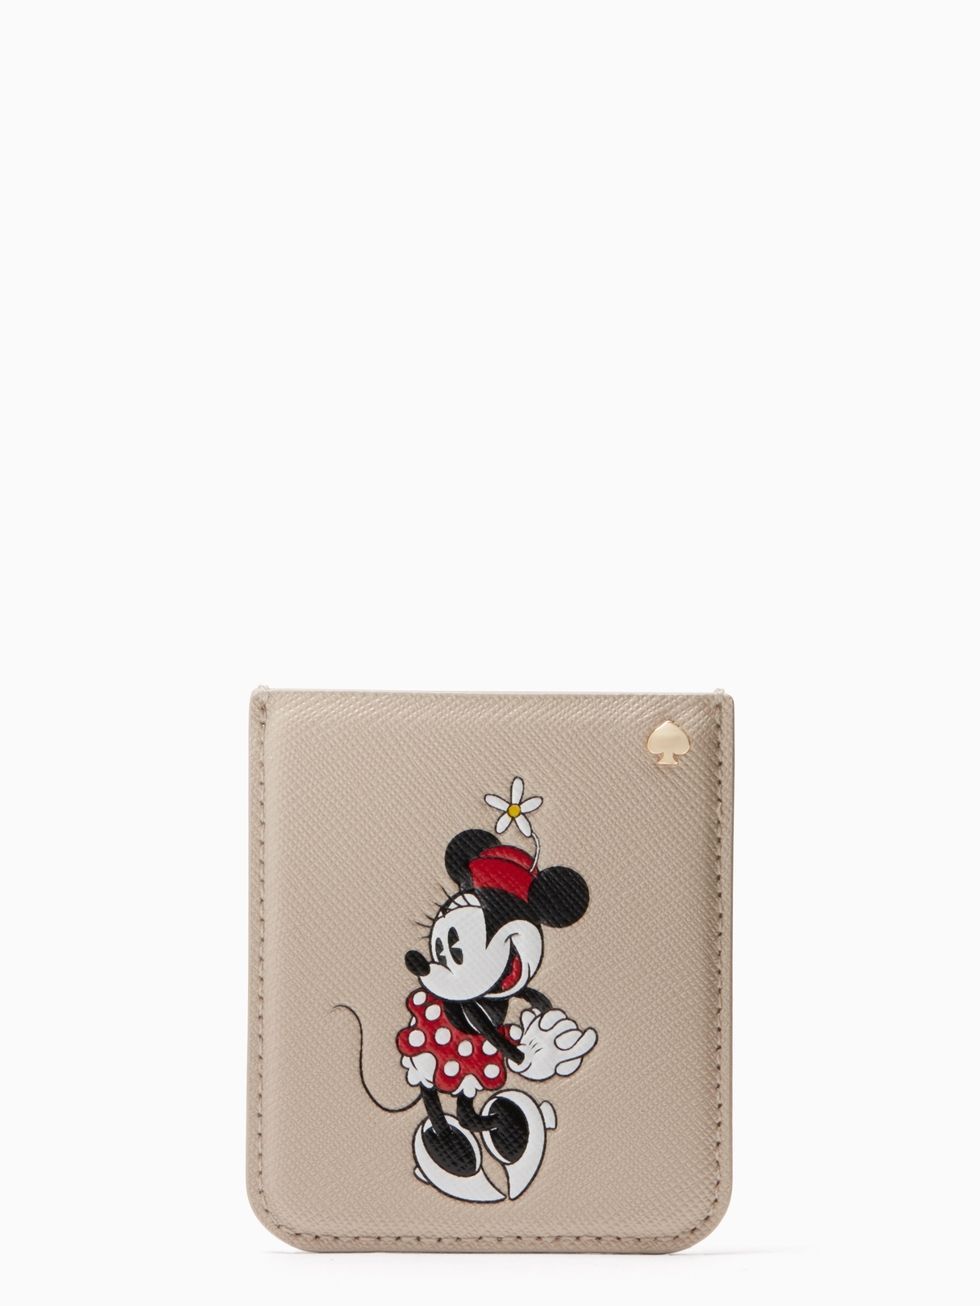 Release Date for the NEW Disney Kate Spade Line!